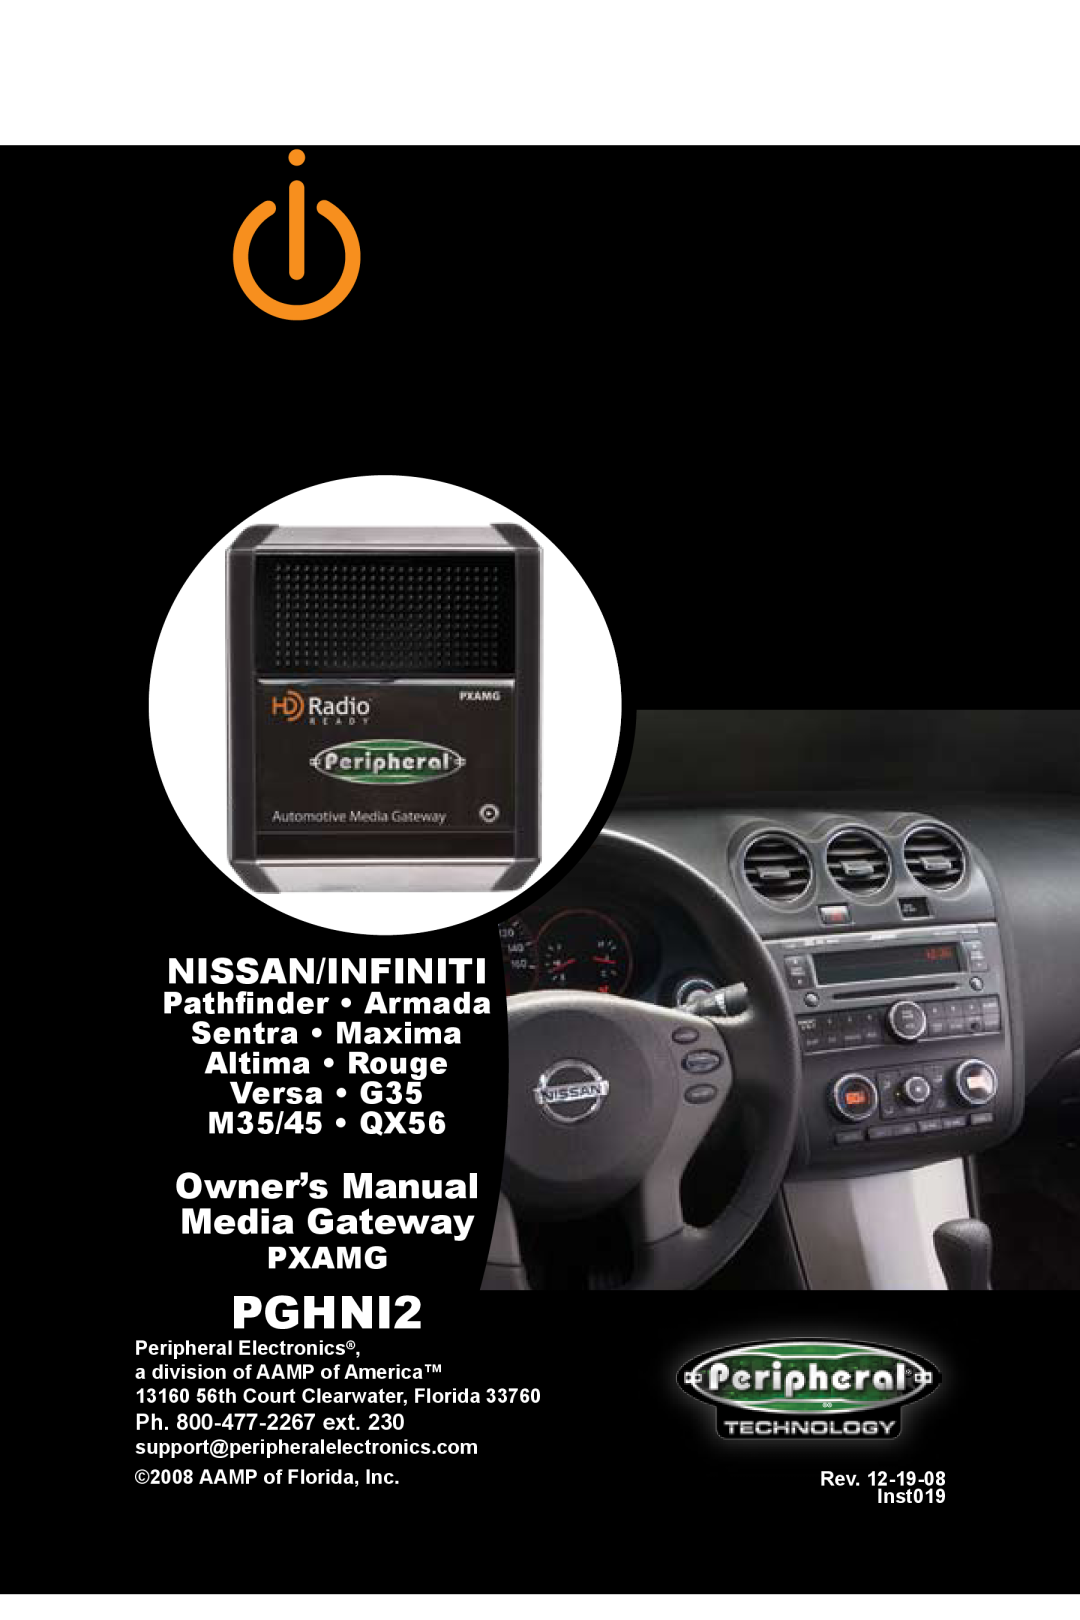 Peripheral Electronics PGHNI2 owner manual iPod, Expand Your Factory Radio, Nissan/Infiniti, Owner’s Manual Media Gateway 